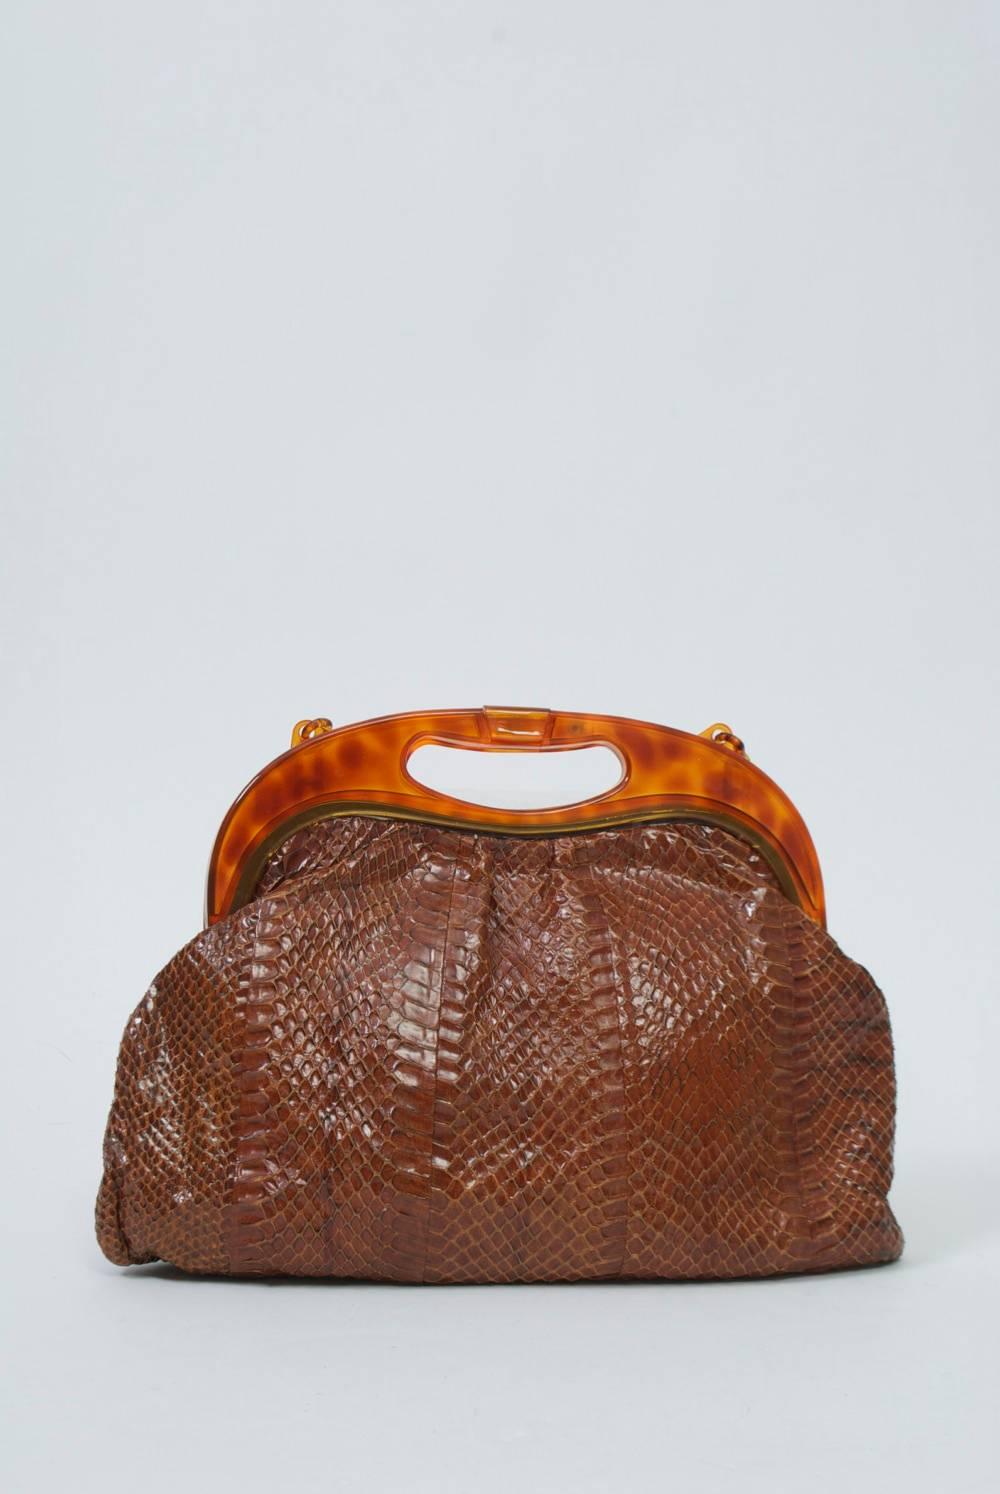 1970s light brown snakeskin handbag featuring a plastic frame, latch, and link shoulder strap in faux tortoise. Soft shape. Interior has zippered compartment on one side. 